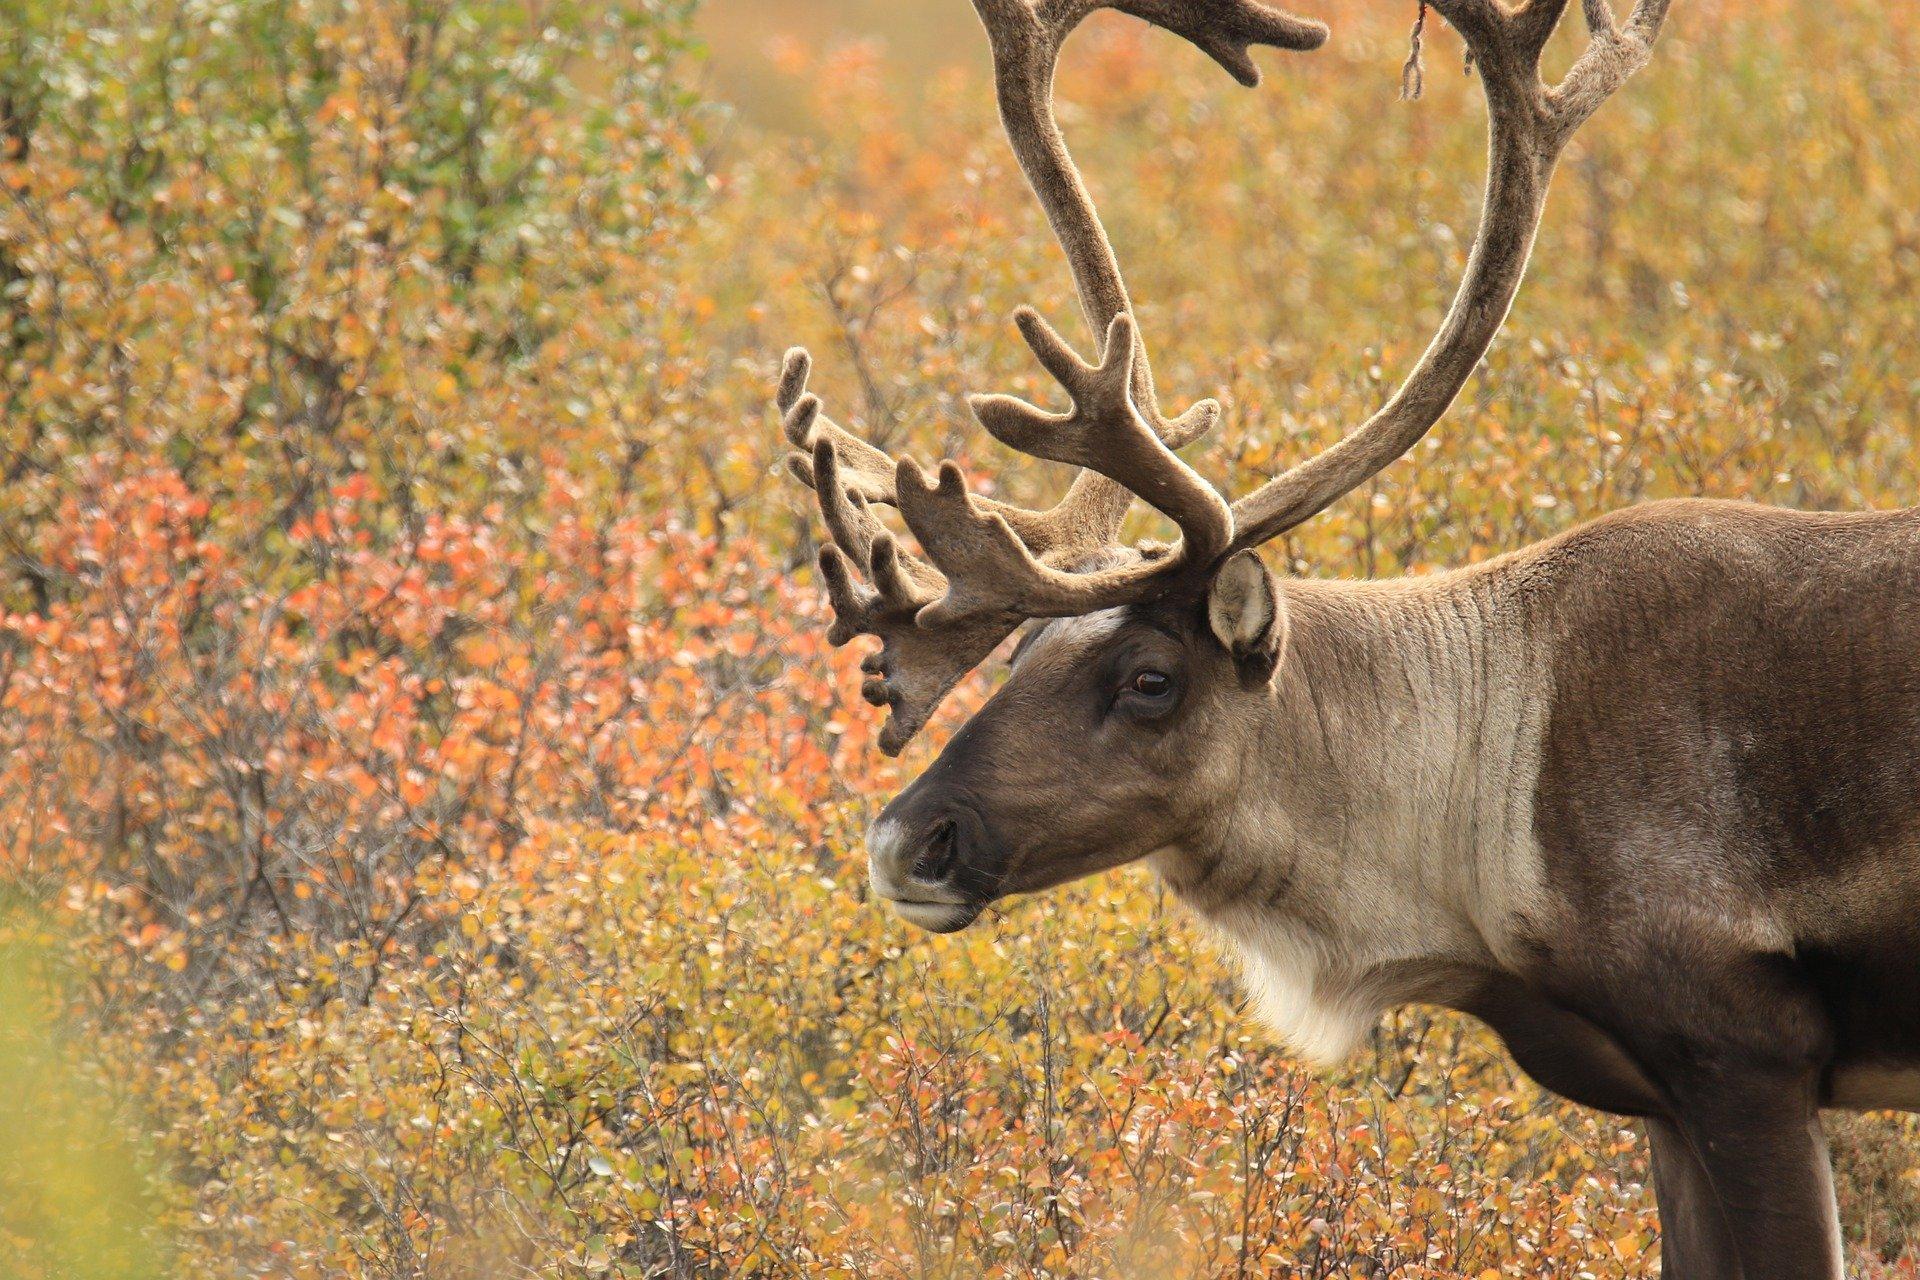 Heading to Alaska to hunt caribou? Pair it with a salmon fishing adventure. Image by Darron McDougal